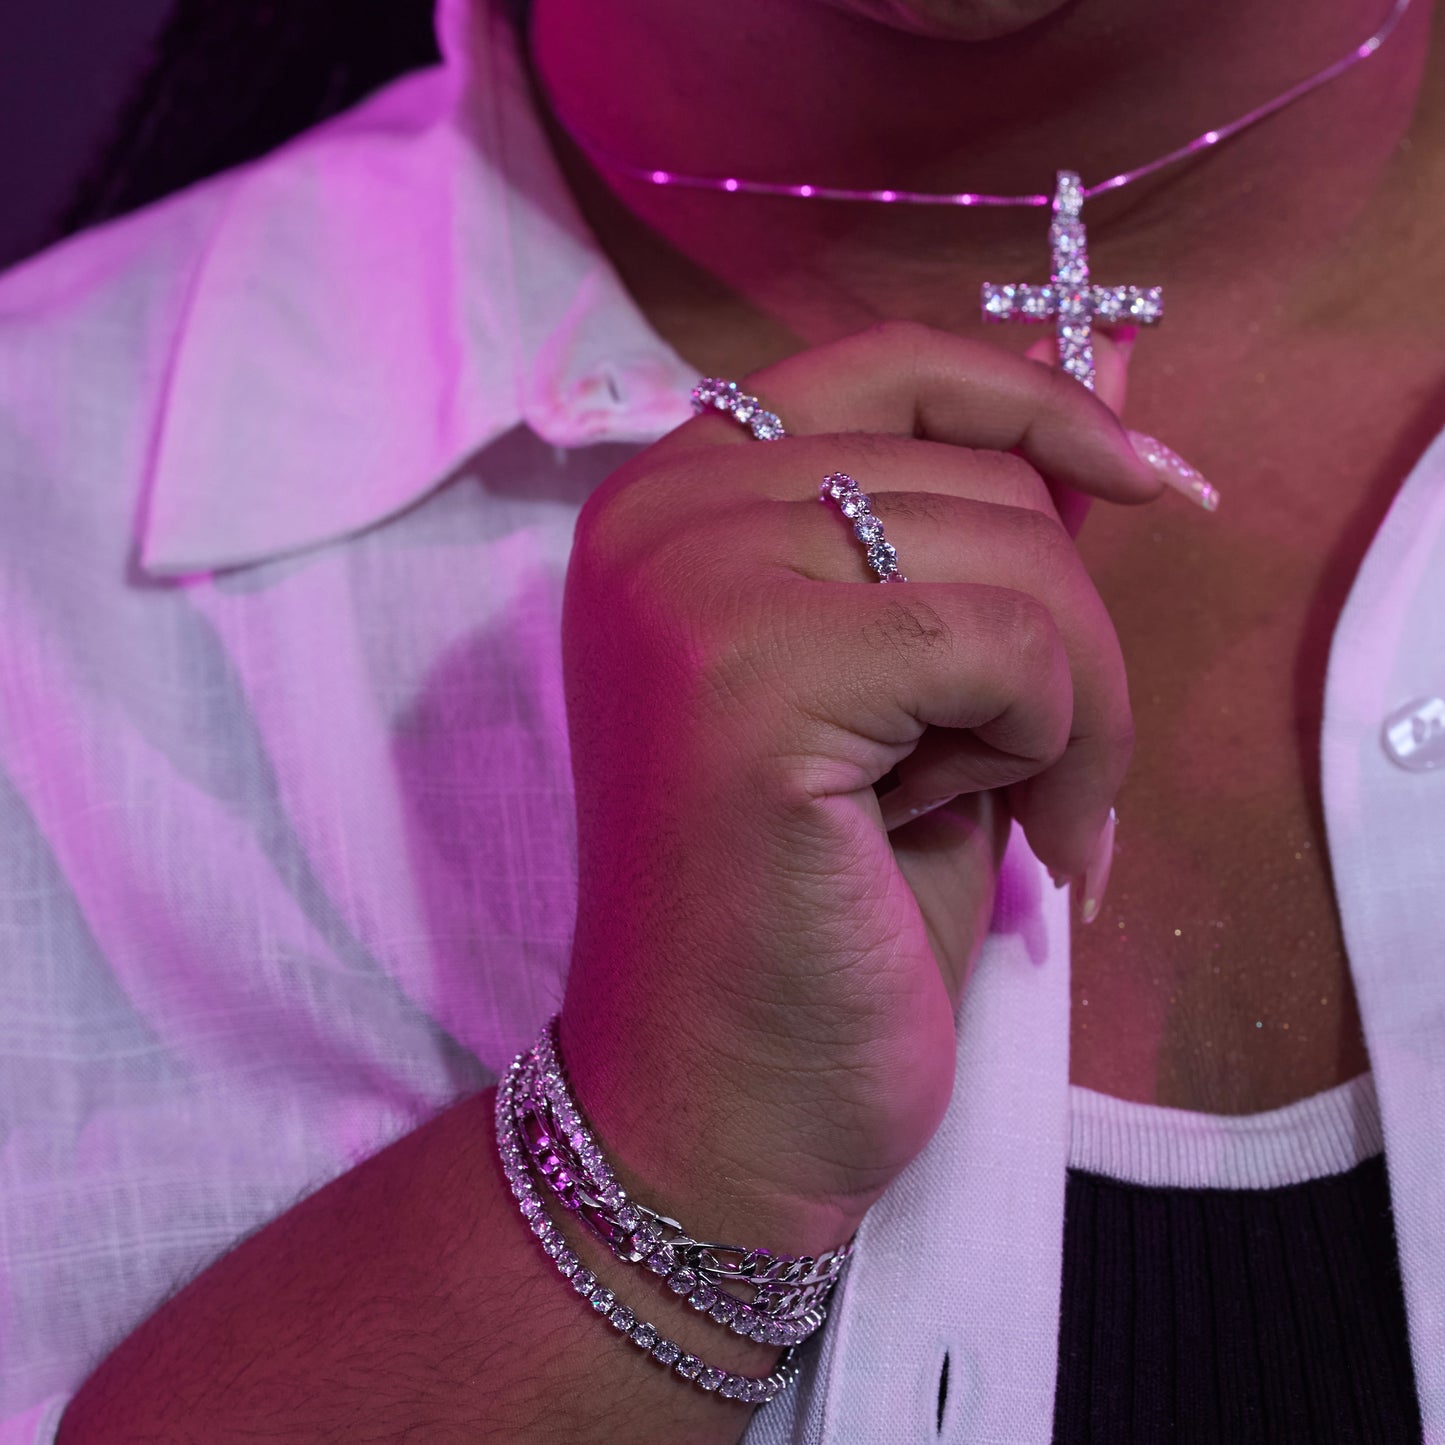 BRYAN'S GLAMOROUS CROSS NECKLACE | Double White Rhodium Plated